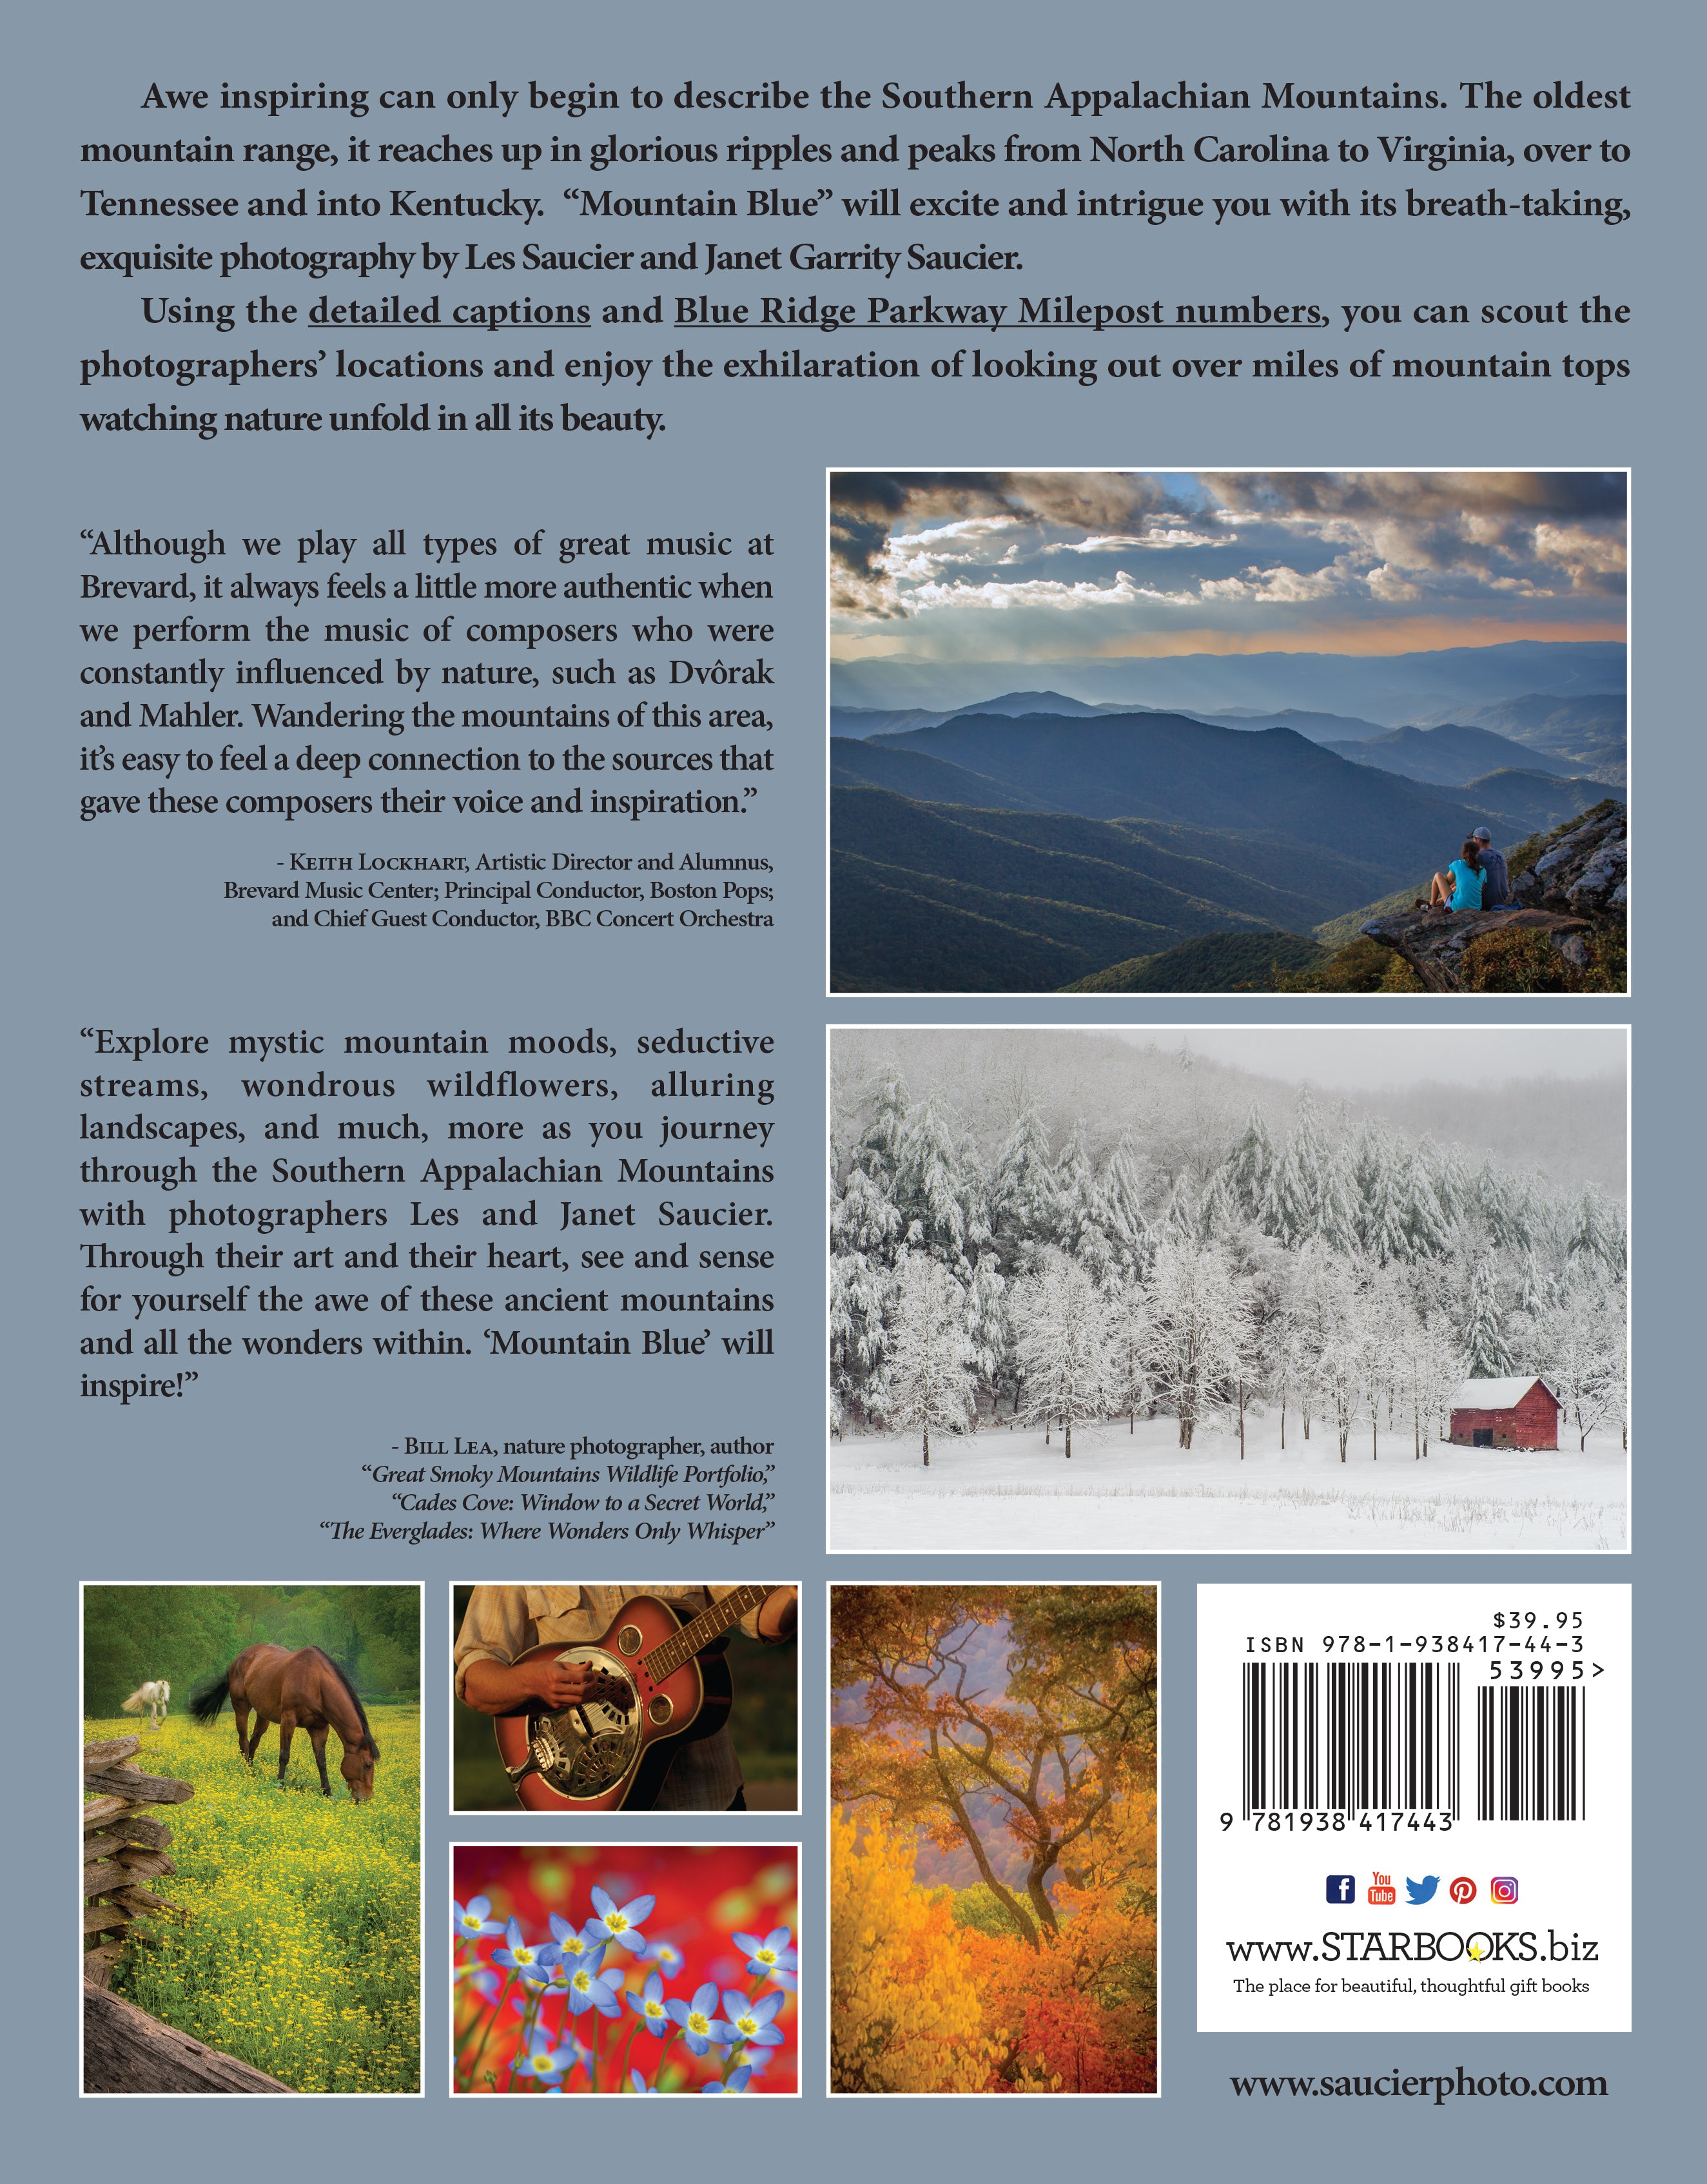 Mountain Blue Photography book of America's Southern Appalachian Mountains. Les and Janet Saucier Starbooks